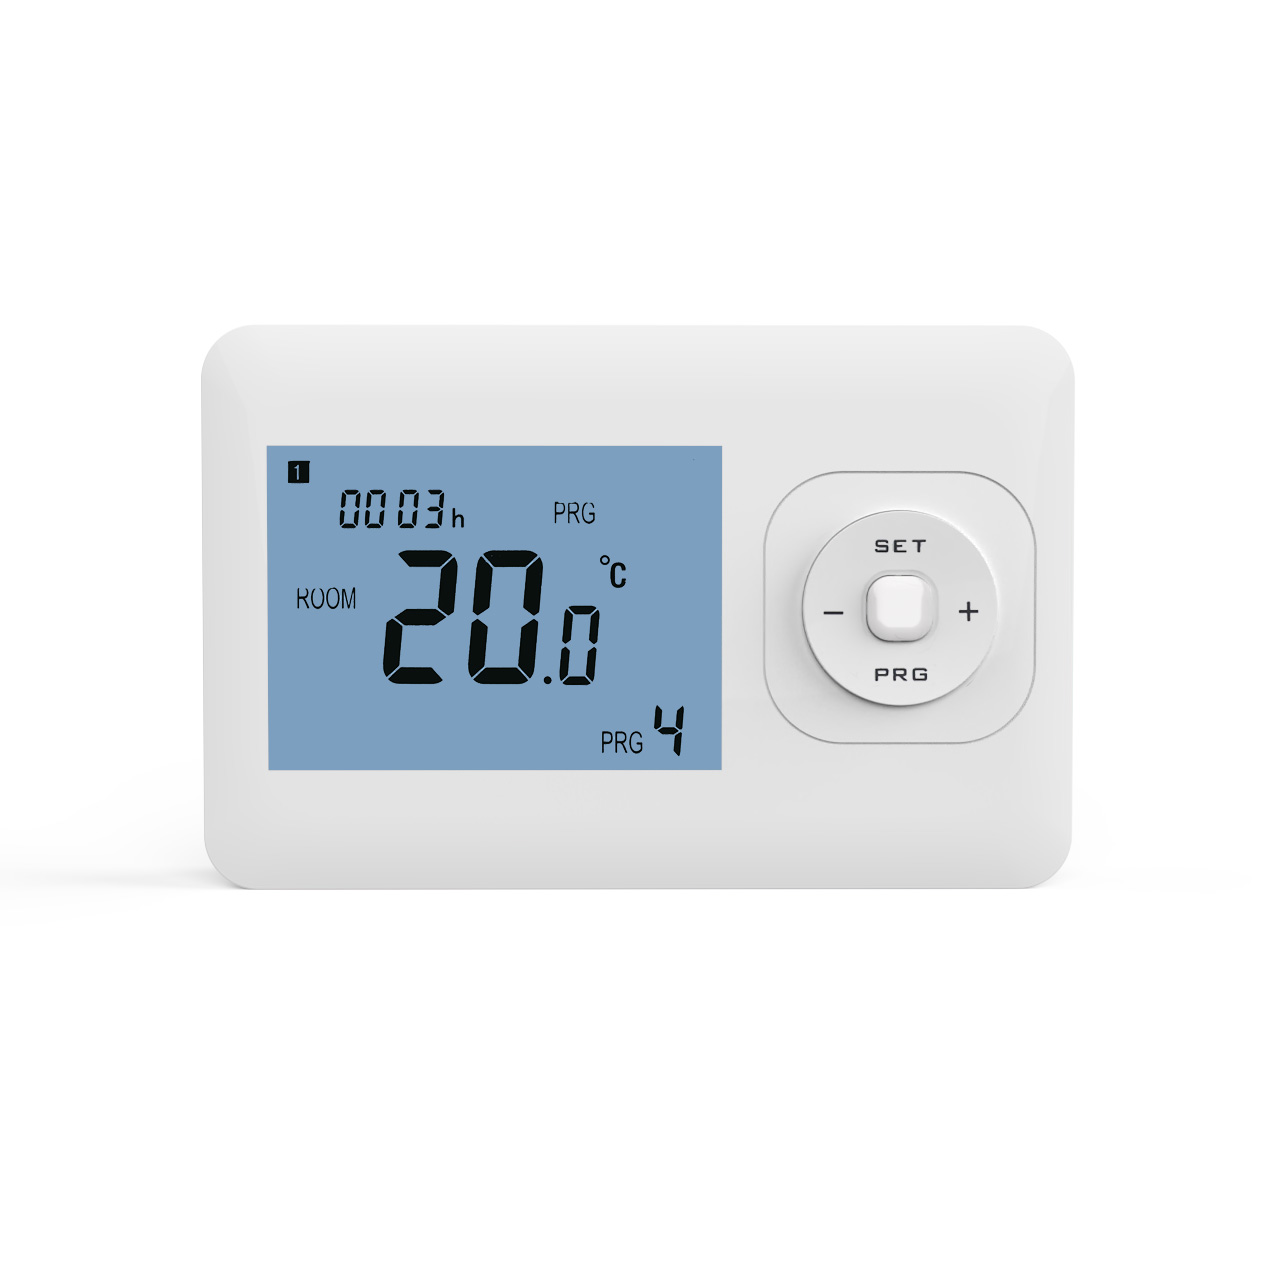 Battery wired heat pump thermostat